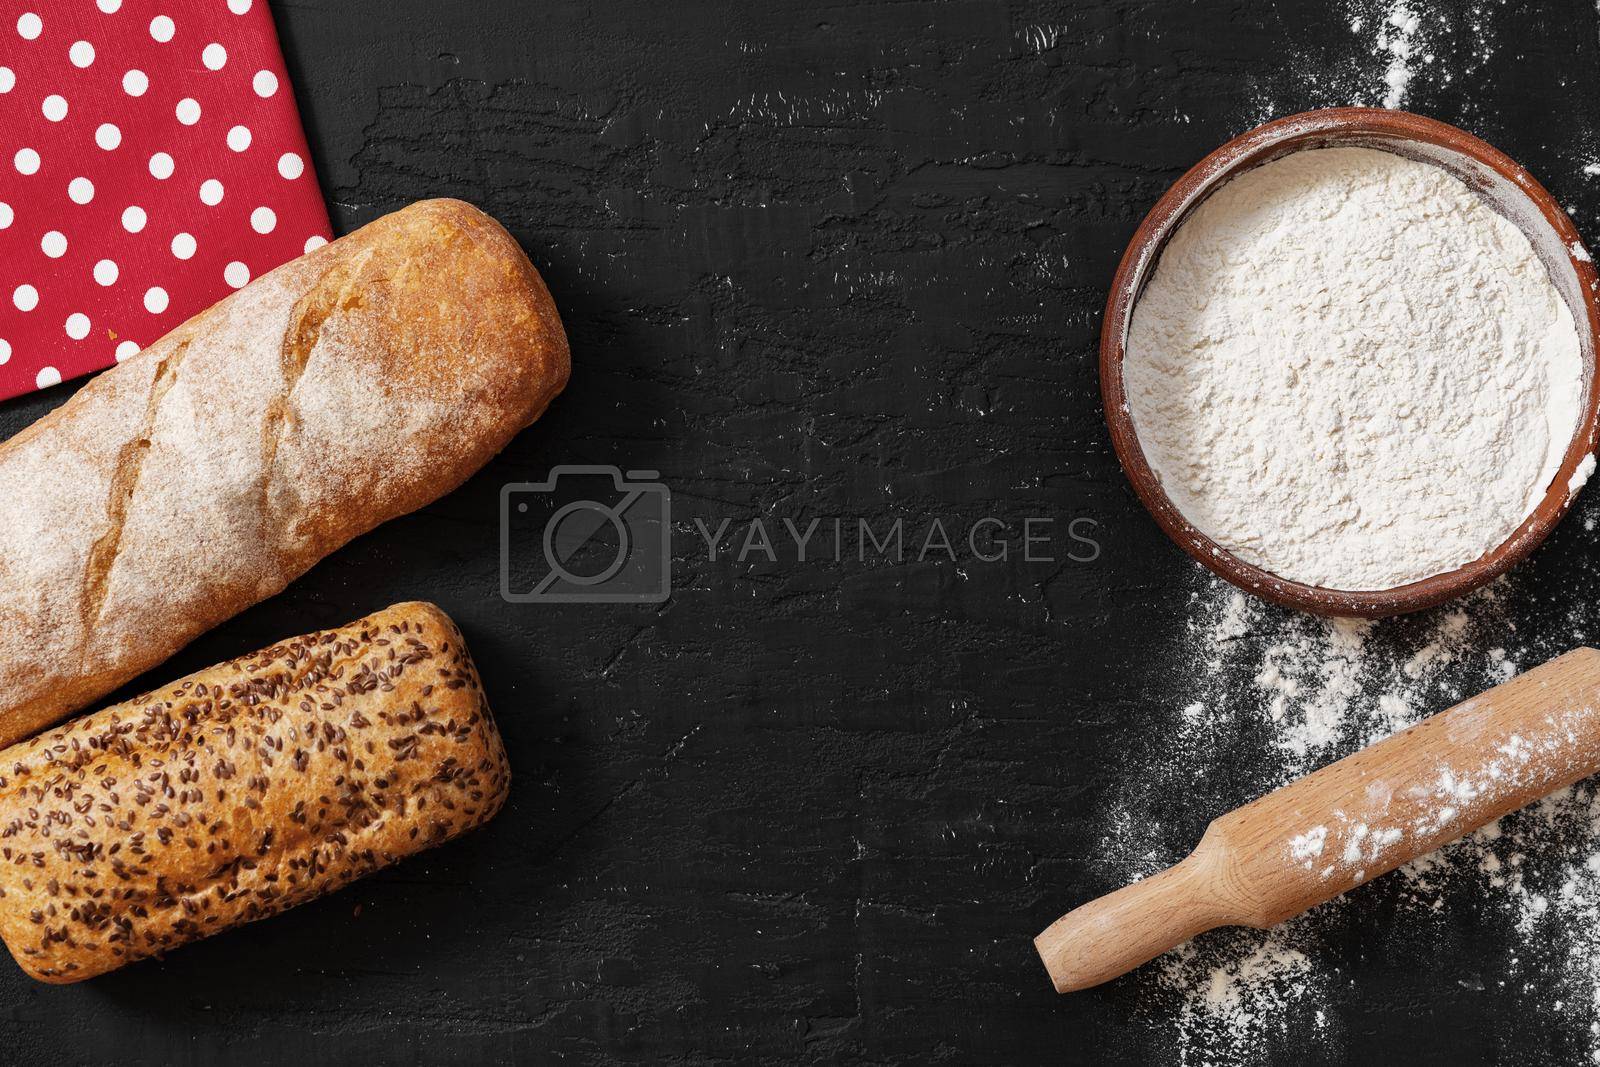 Royalty free image of Fresh bread with bowl of flour on dark background by Fabrikasimf